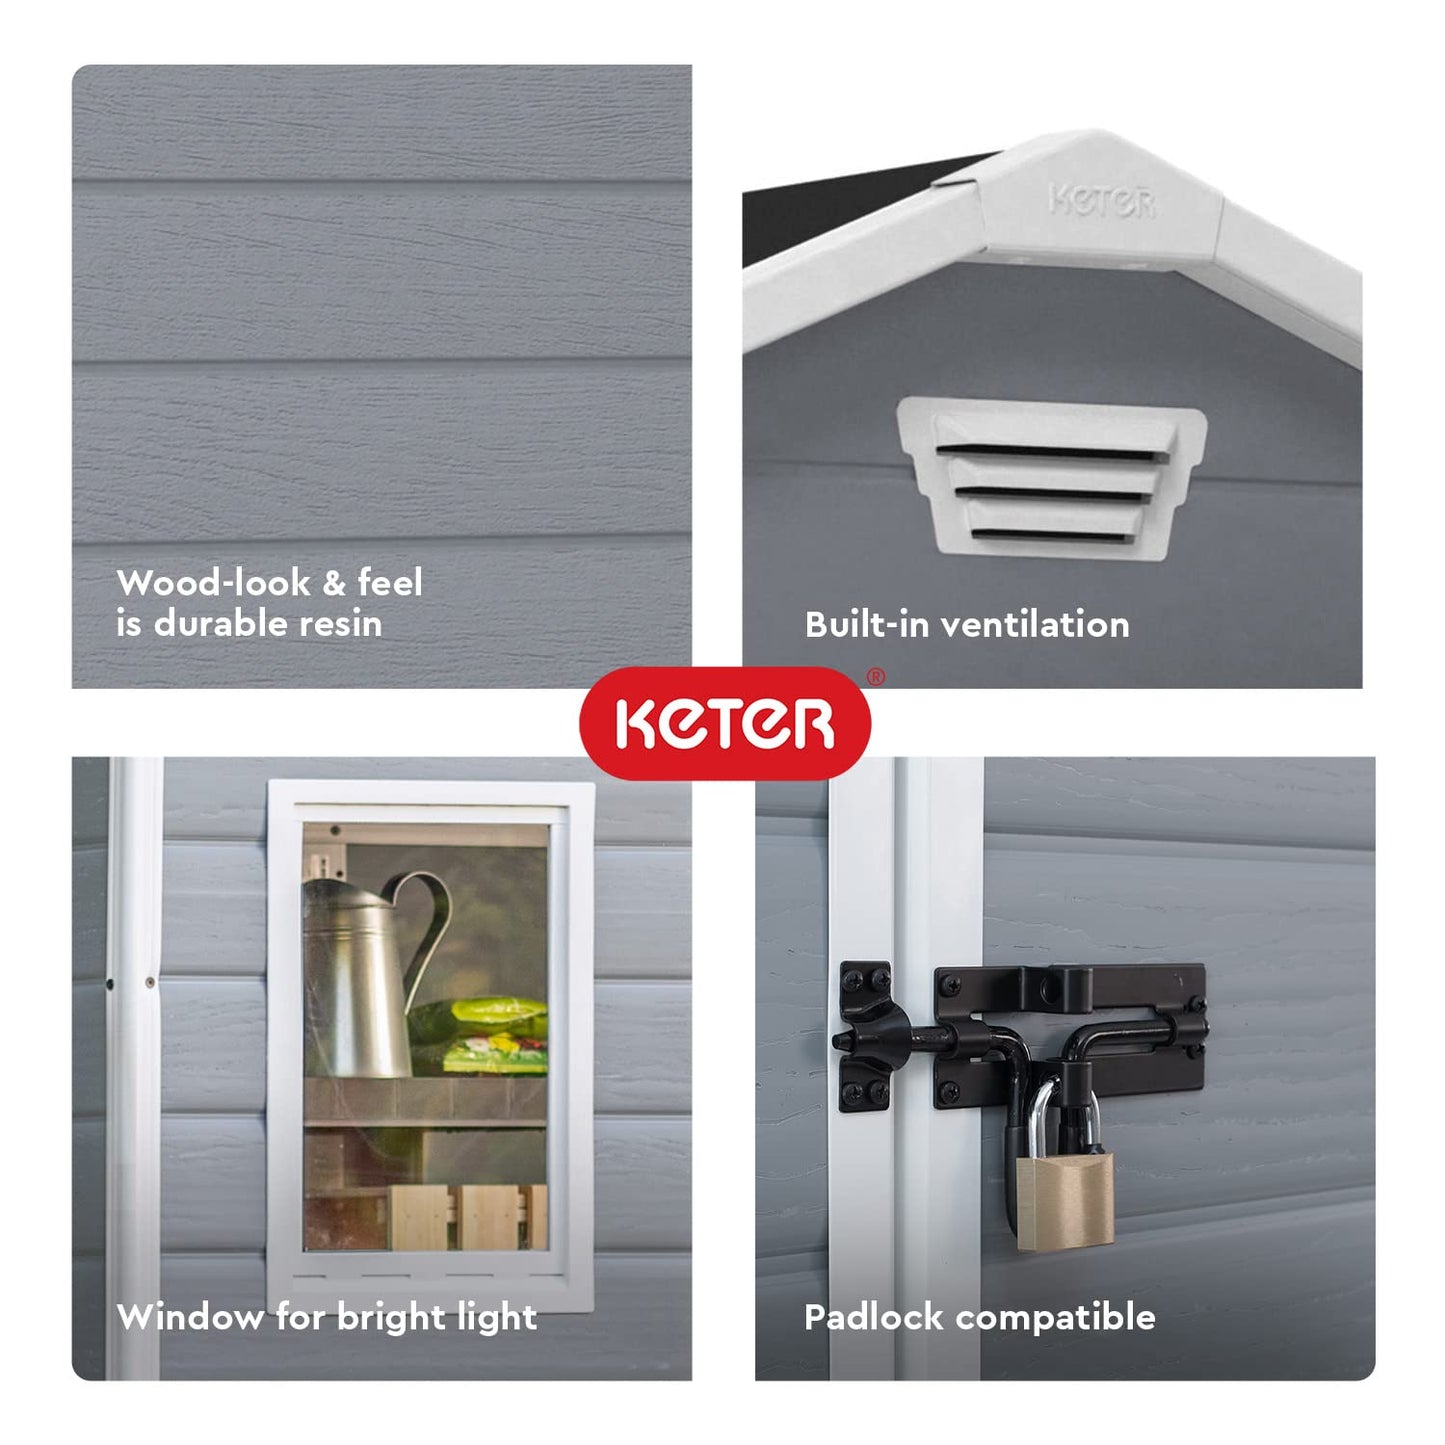 Keter Manor 4x6 Resin Outdoor Storage Shed Kit-Perfect to Store Patio Furniture, Garden Tools Bike Accessories, Beach Chairs and Lawn Mower, Grey & White